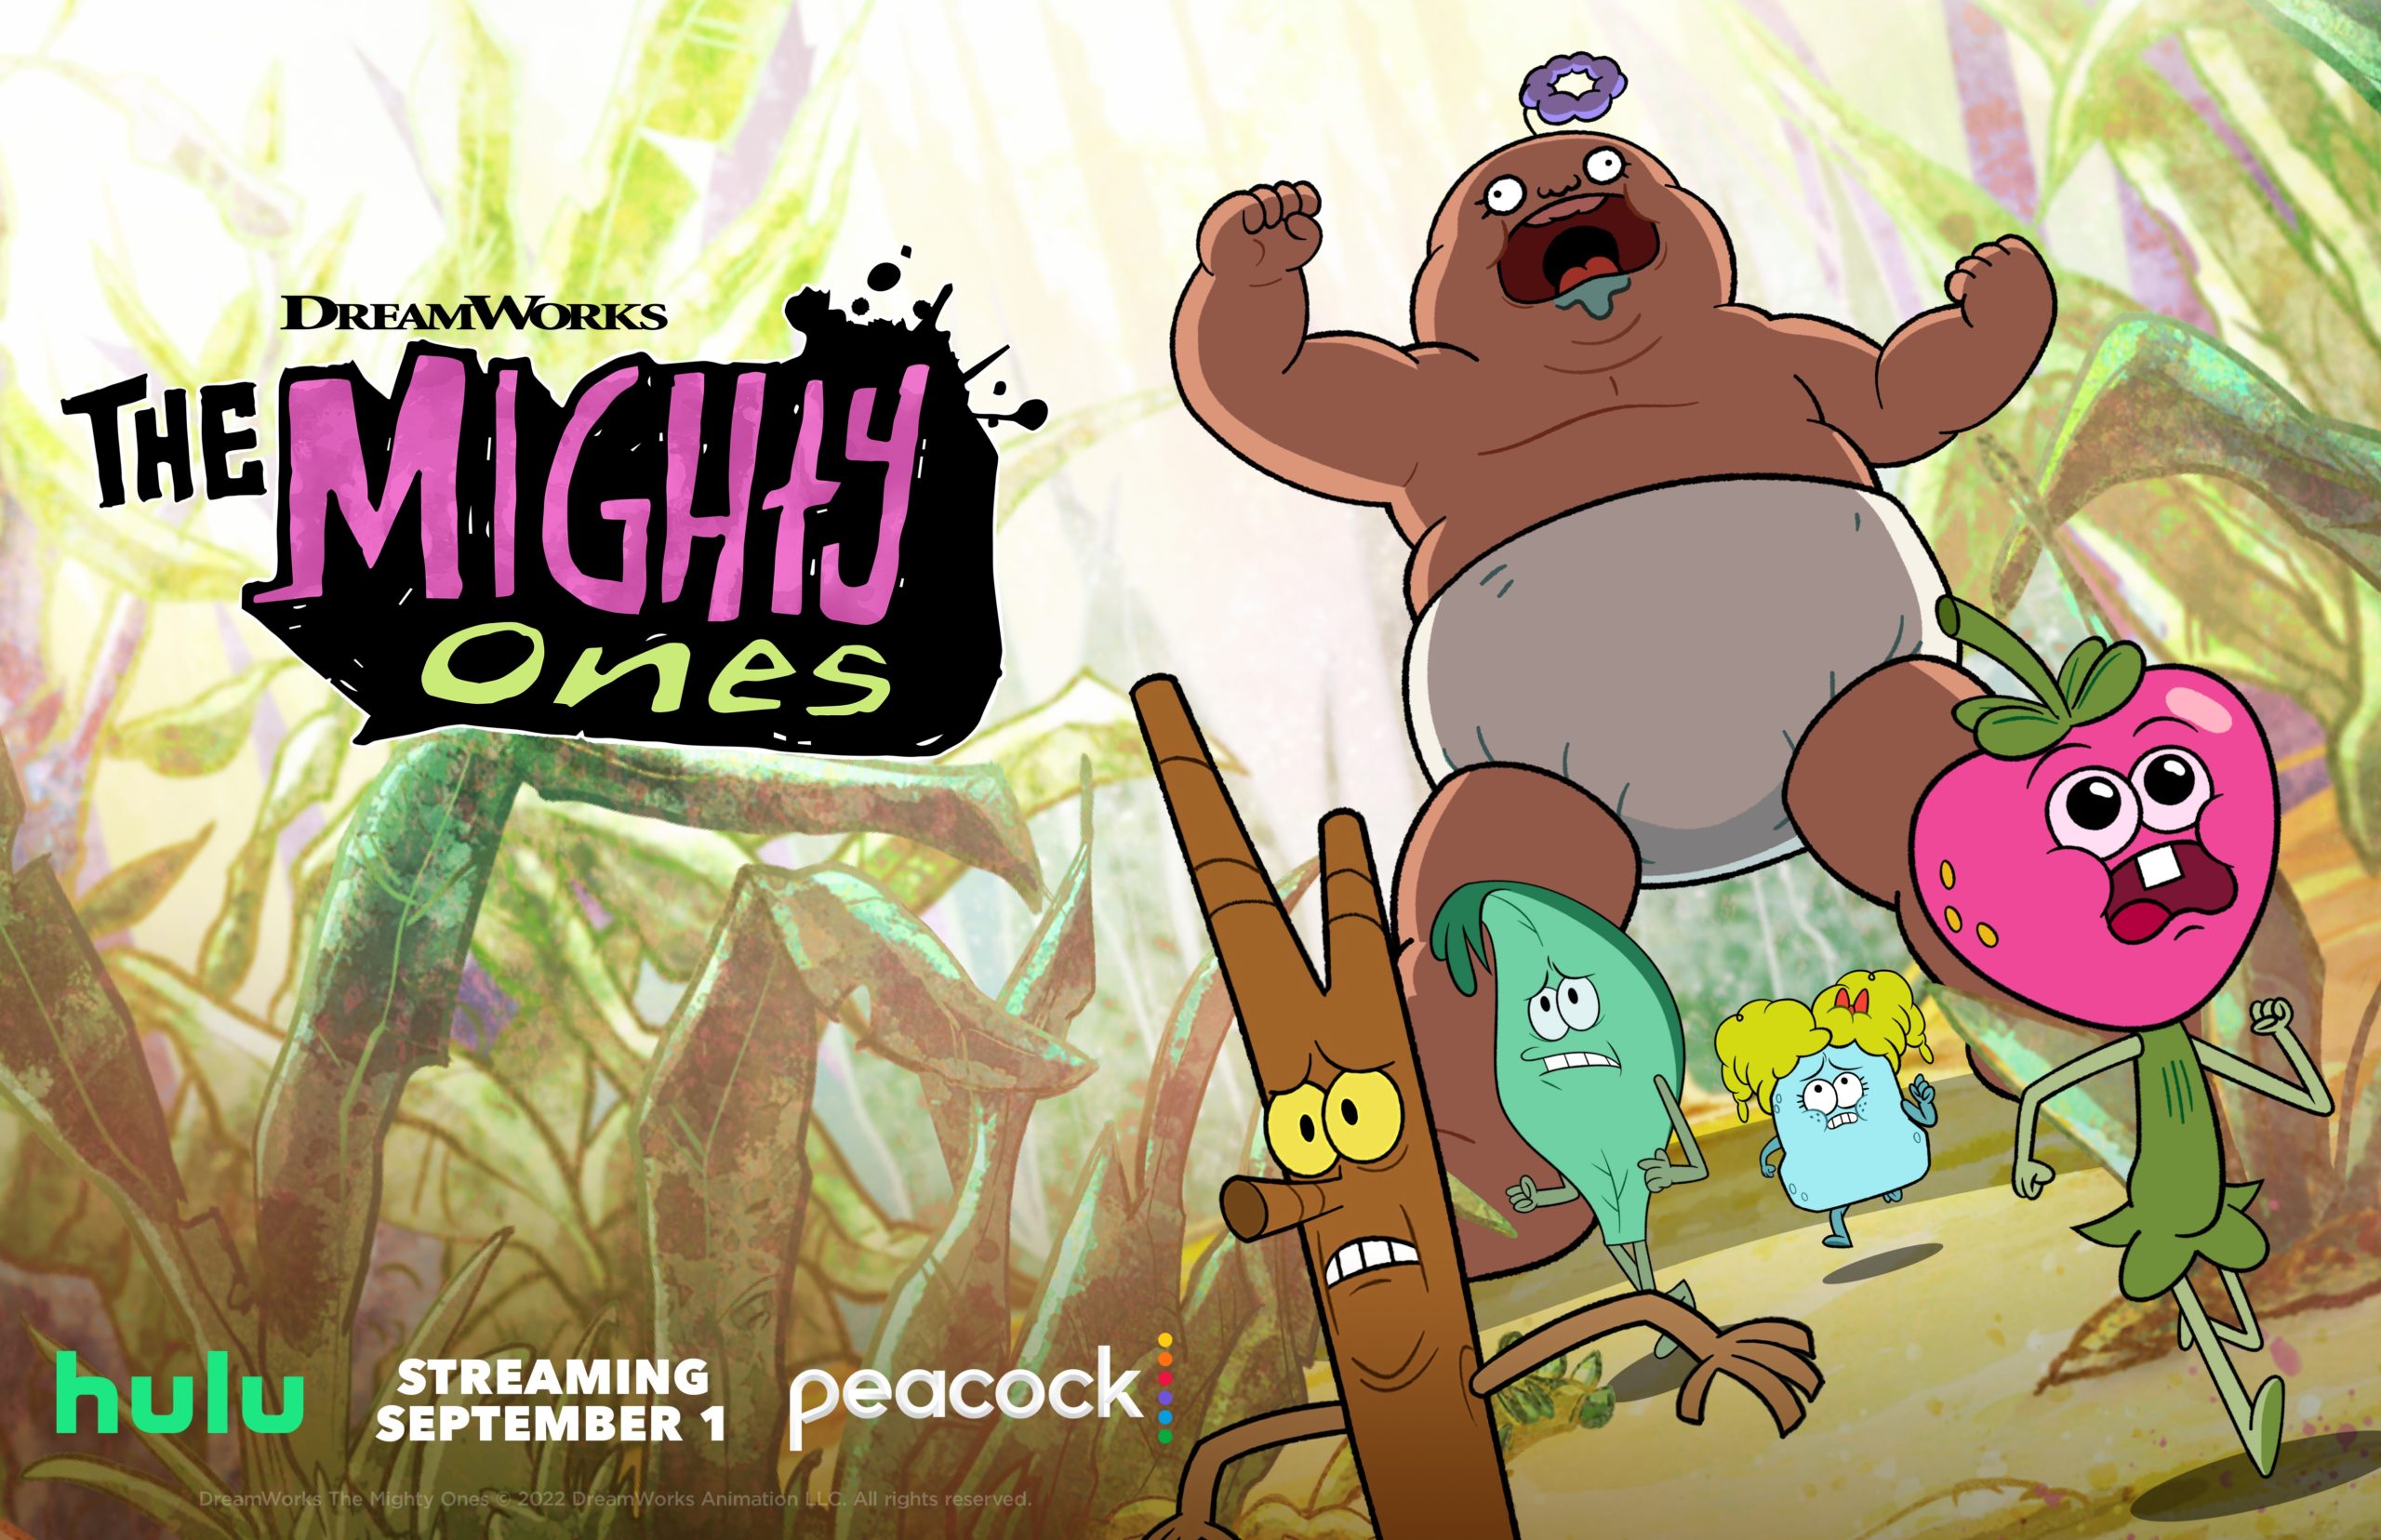 DreamWorks Debuts New Trailer For THE MIGHTY ONES Season 3, Coming to  Peacock and Hulu September 1 